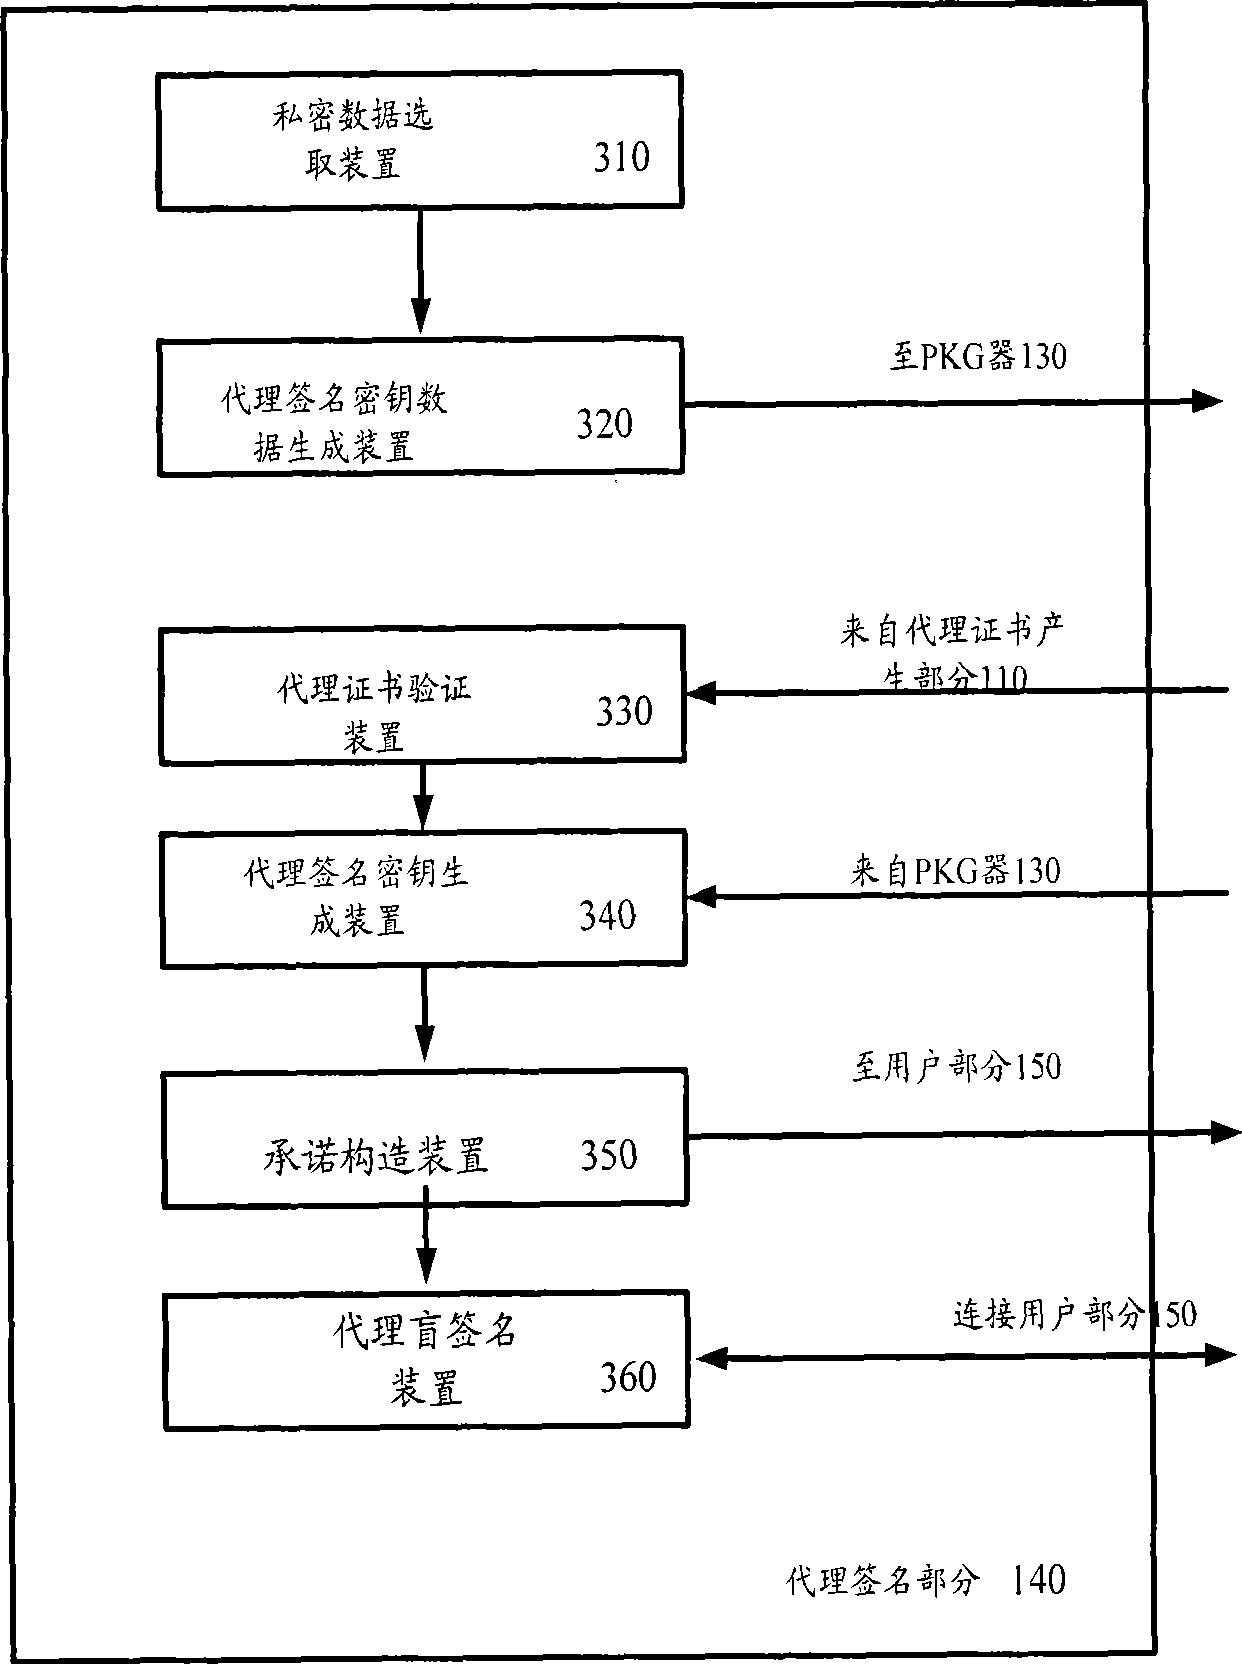 Proxy blind signing system and method based on identification